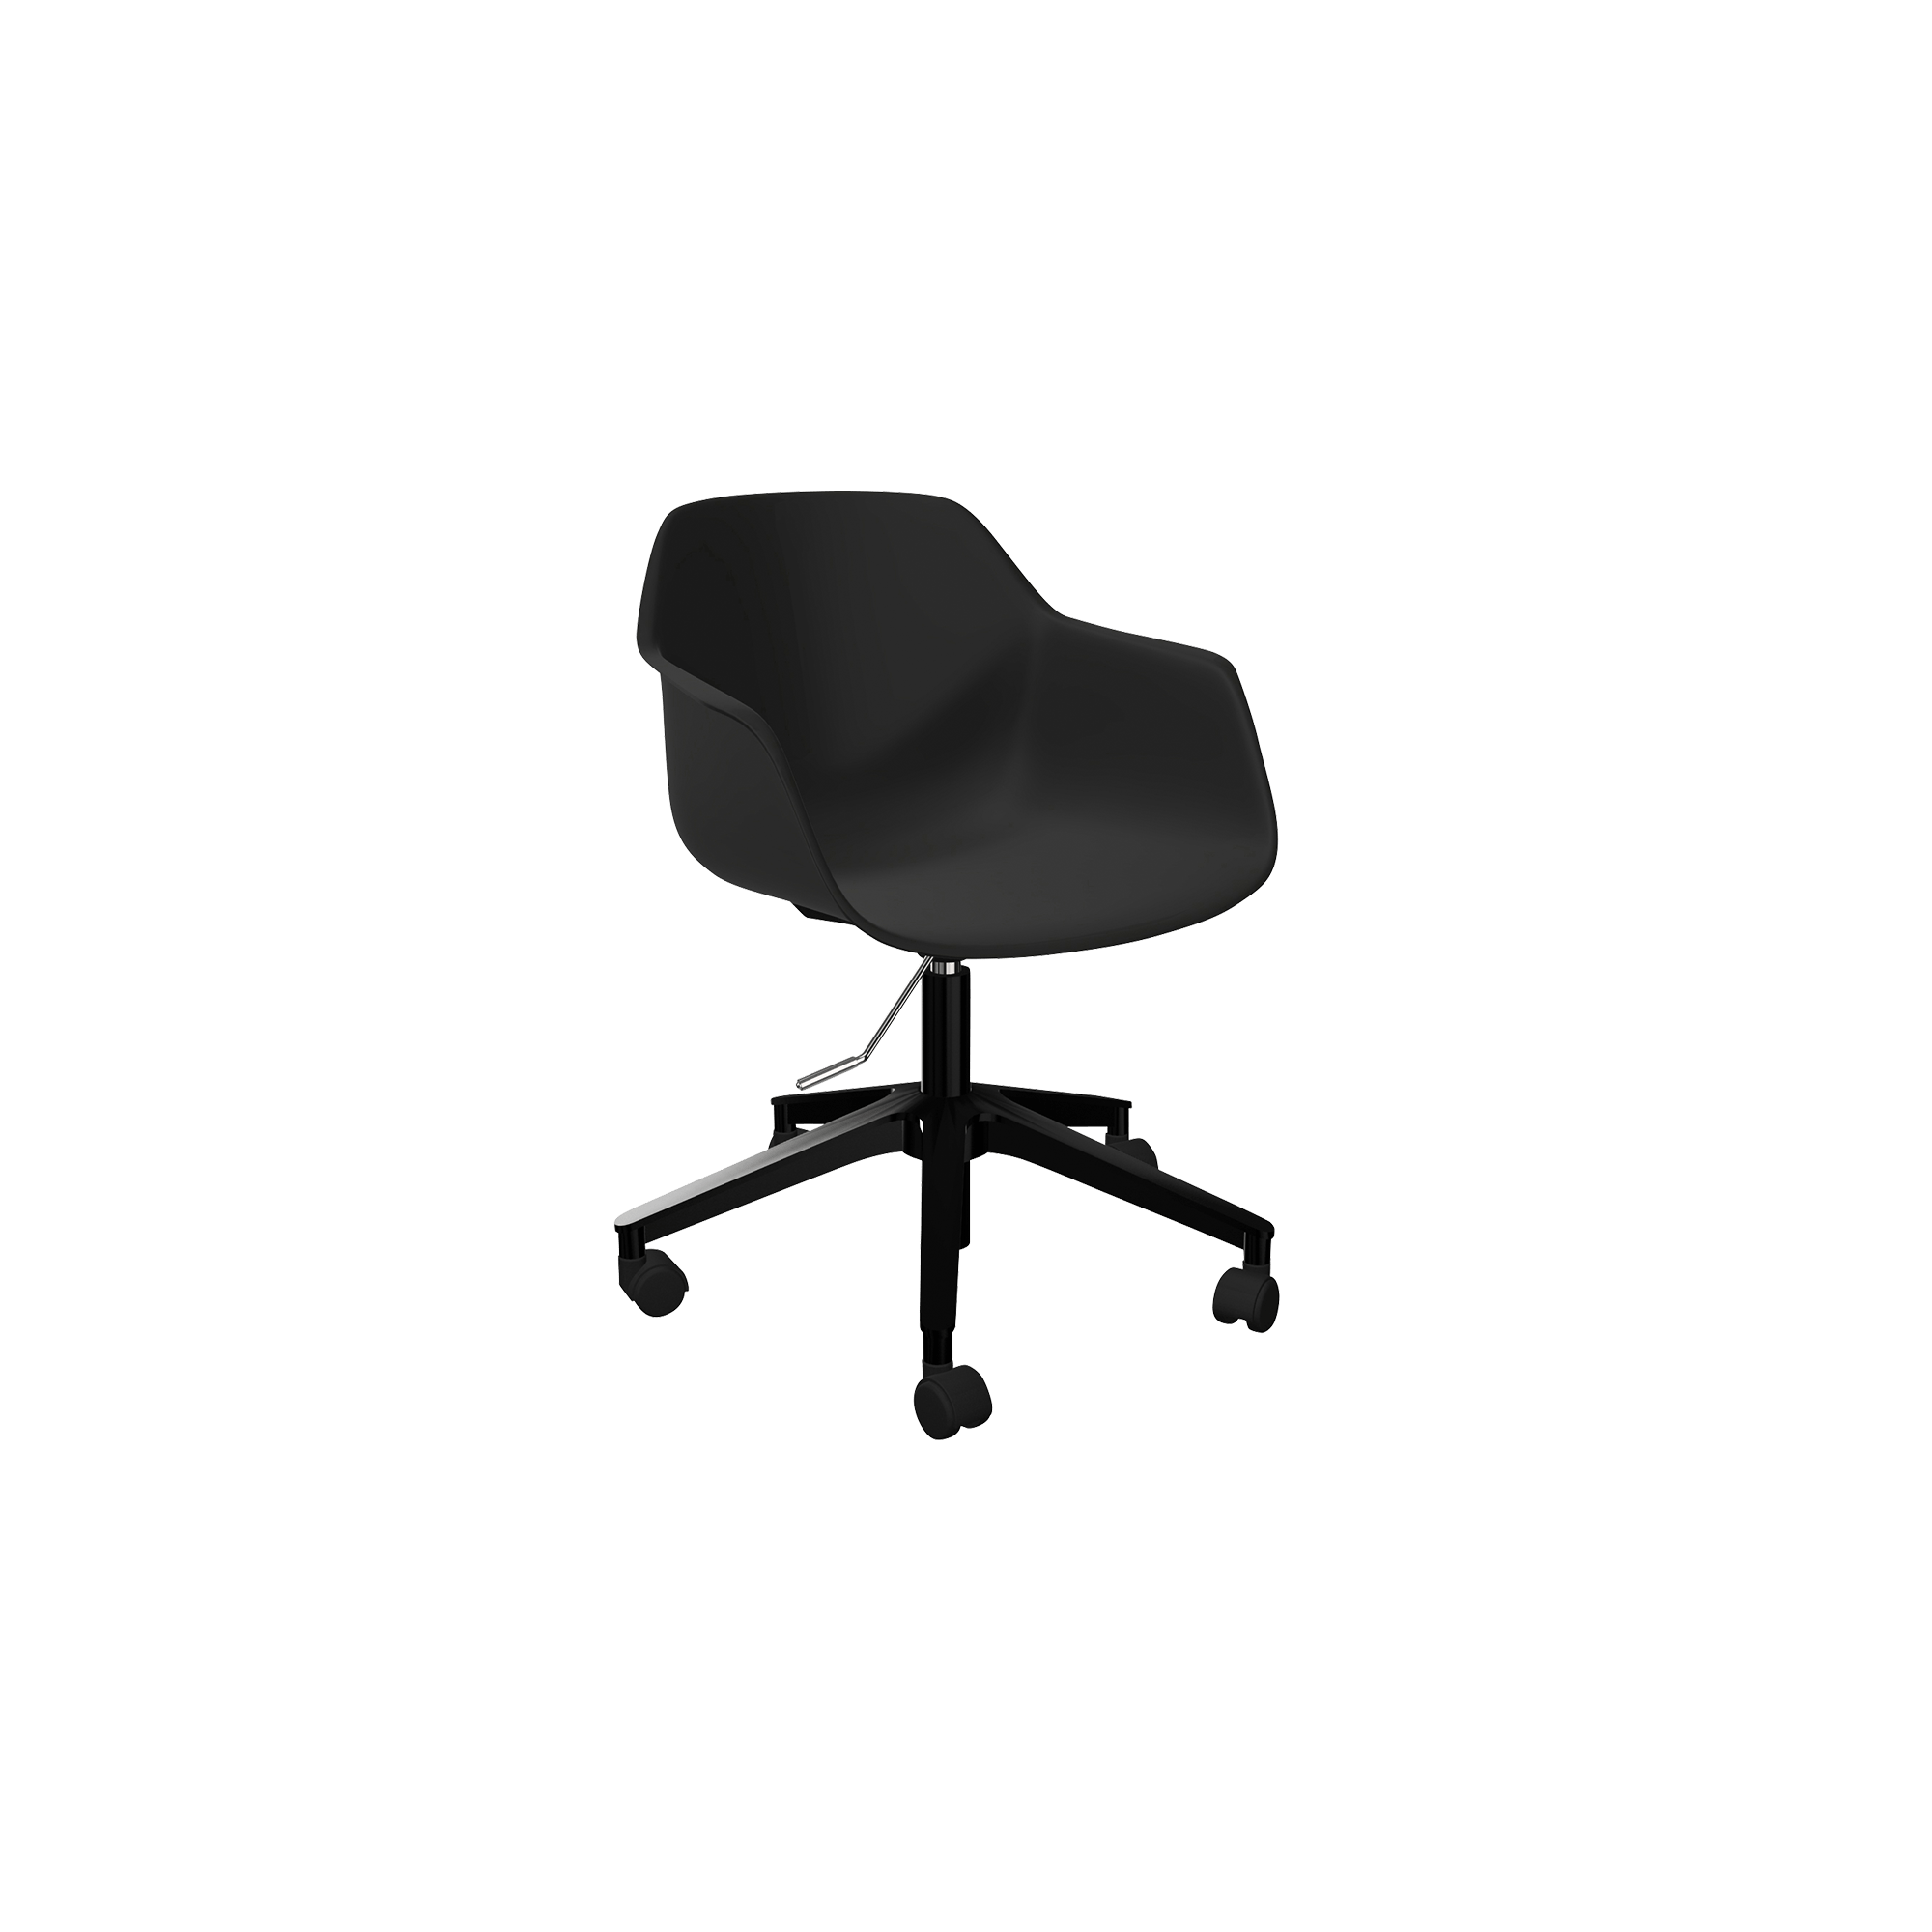 A black office chair on casters